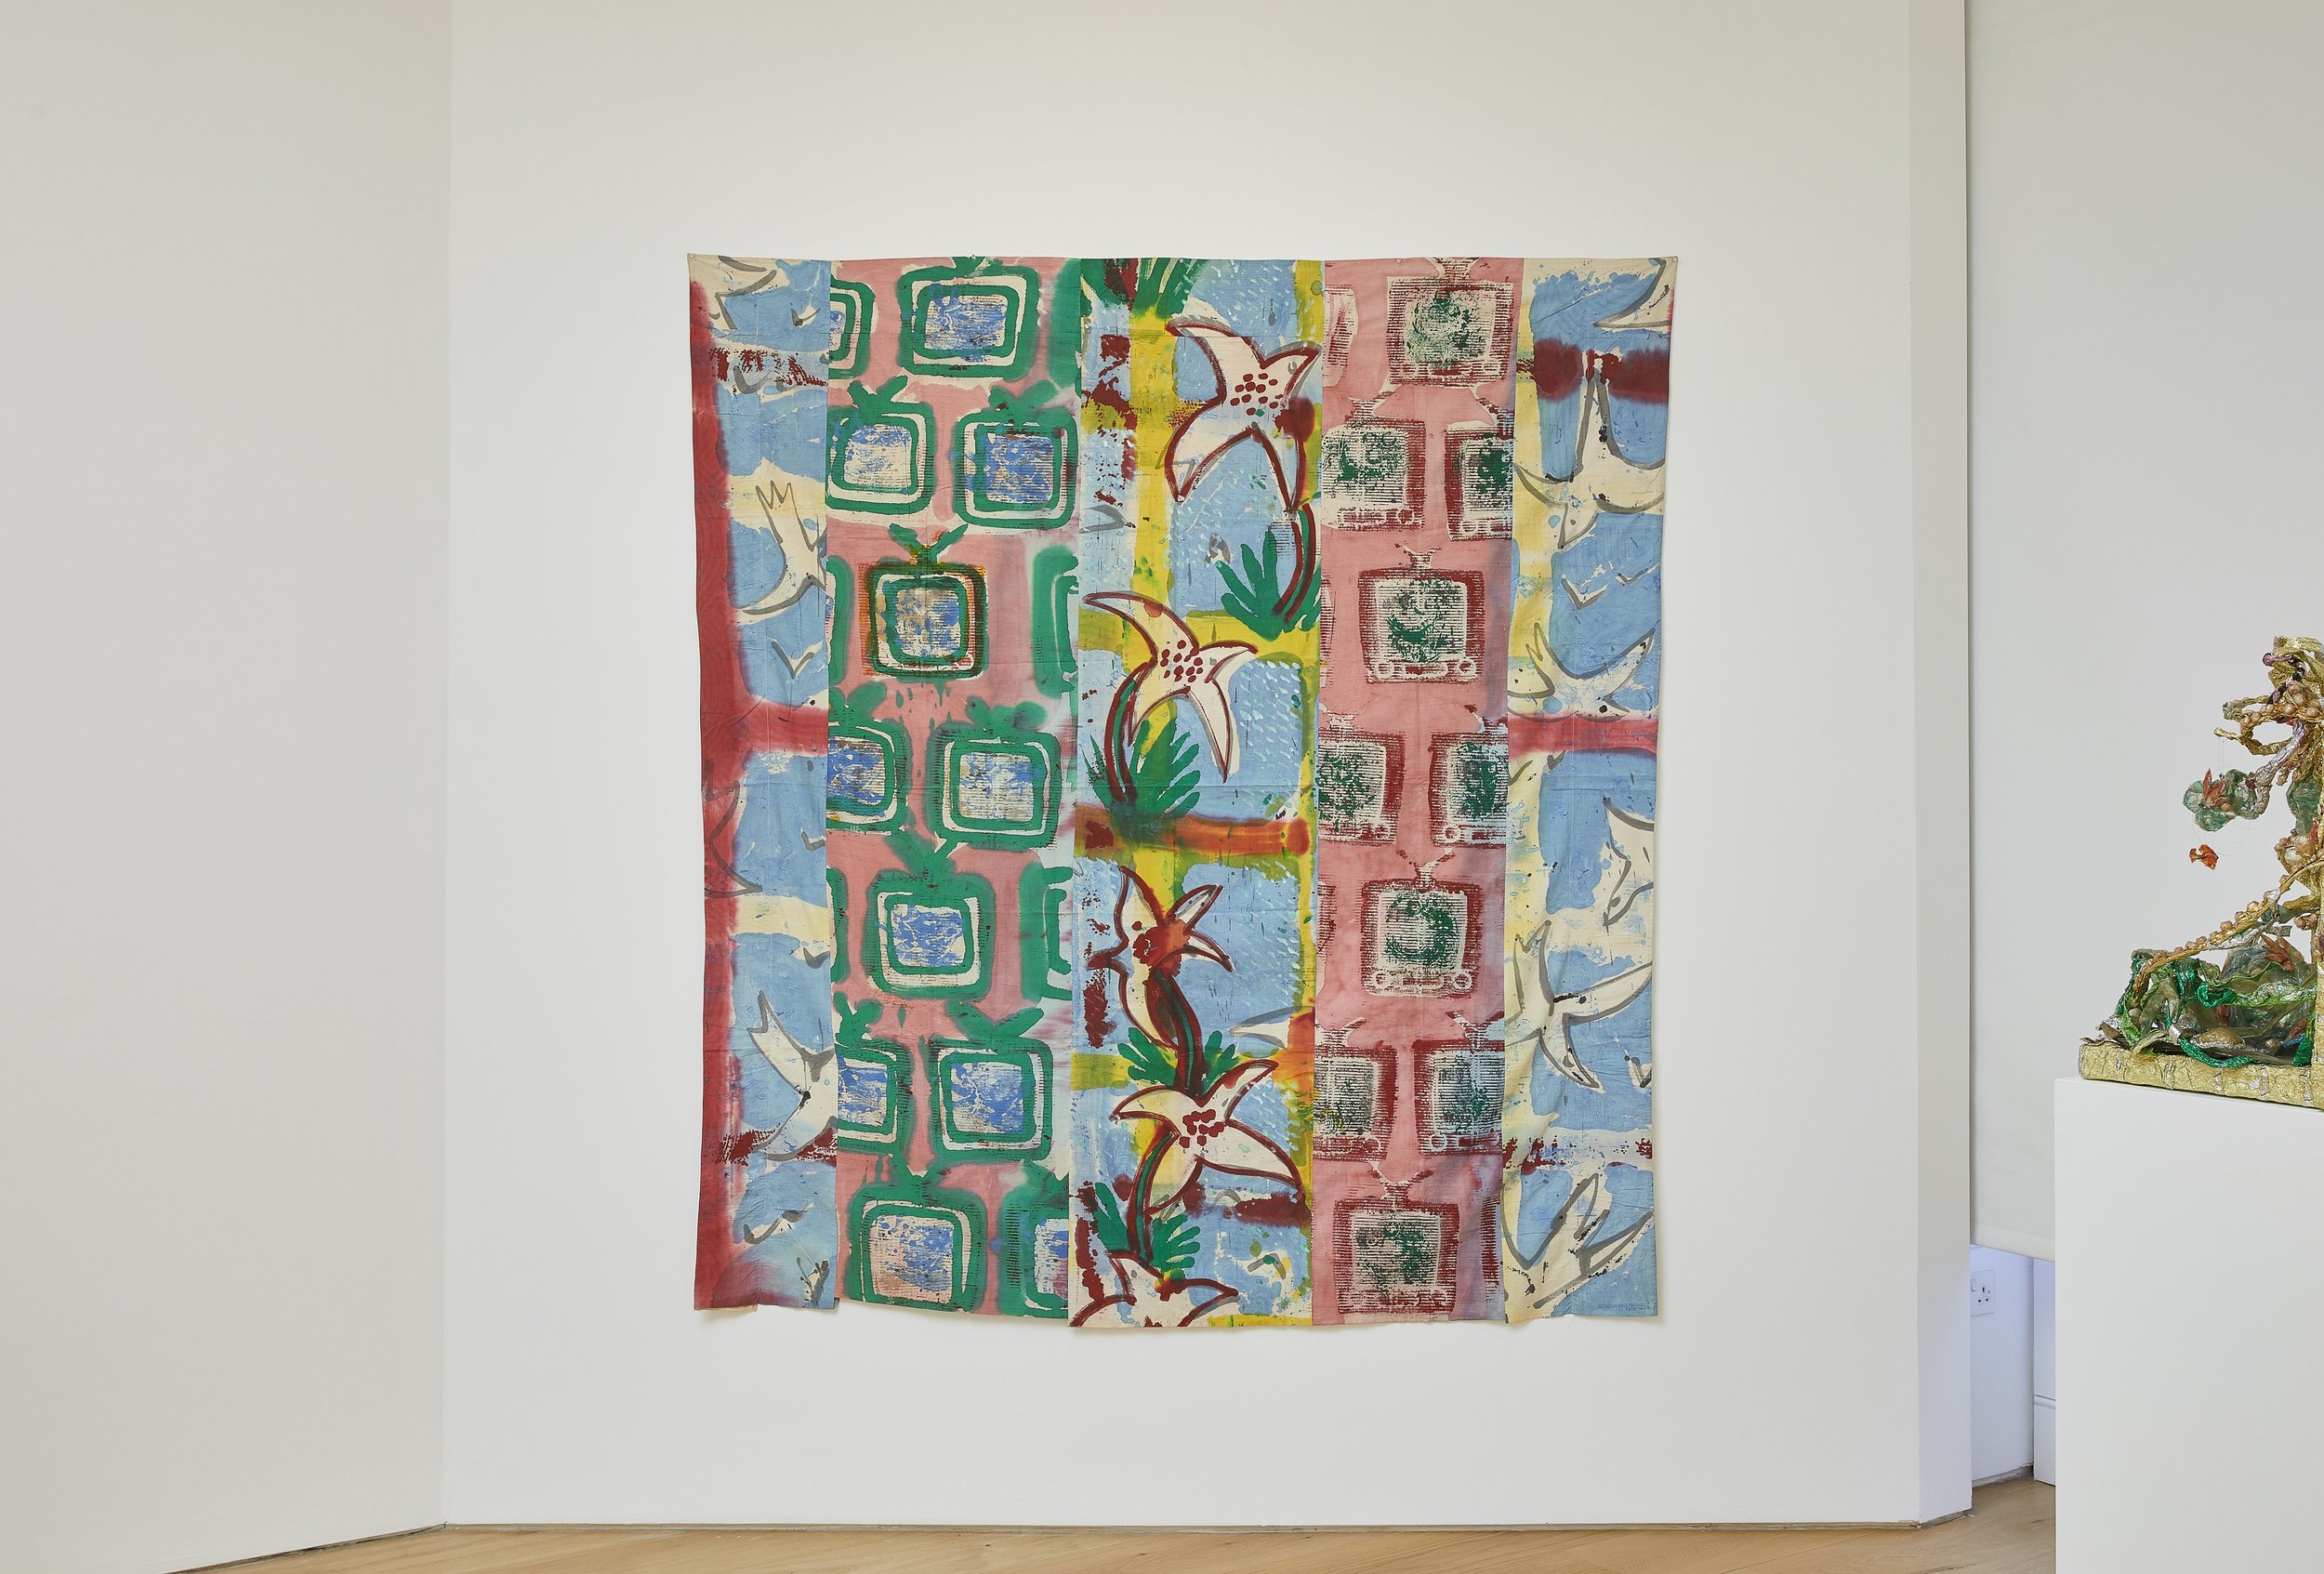  Kim MacConnel,  Chicken Delight  [installation view], 1978. Acrylic on cotton. 83 x 77 inches. 